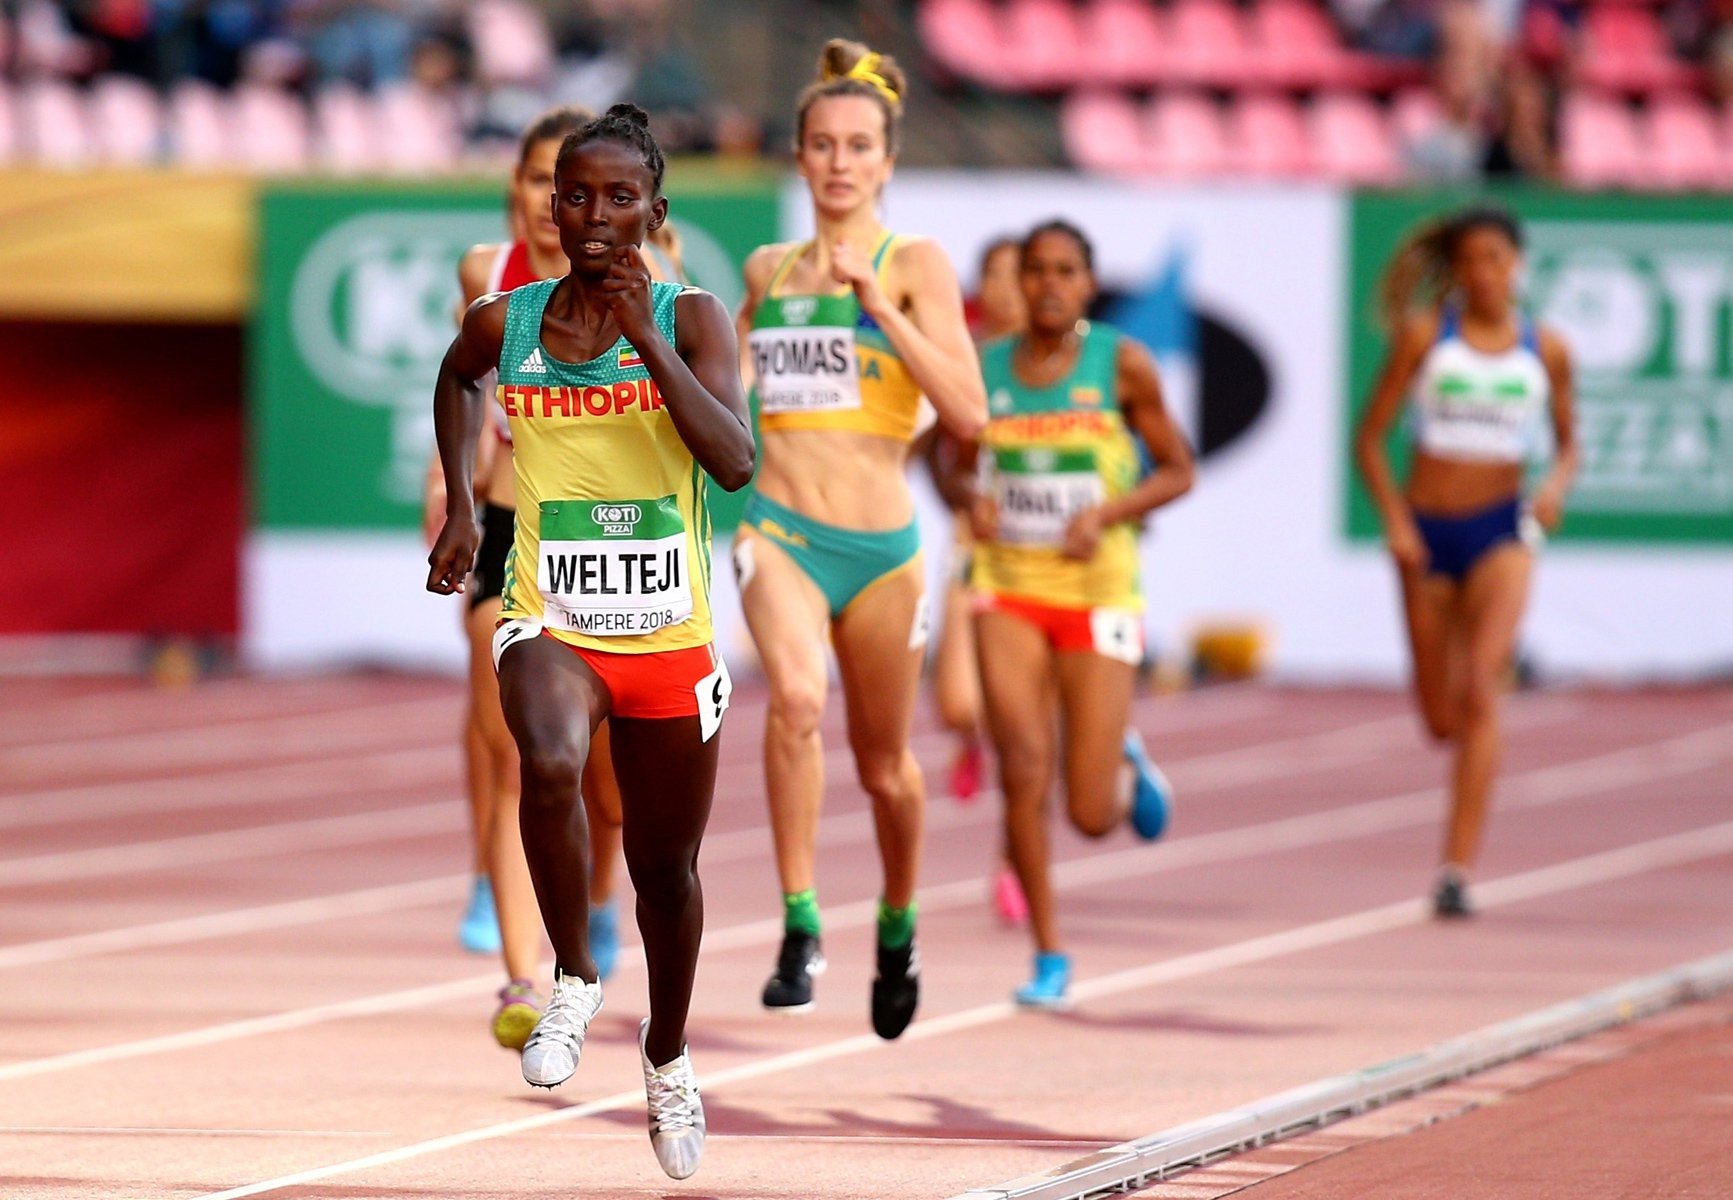 Diribe Welteji (Ethiopia) in the Women's 800m at the IAAF World U20 Championships Tampere 2018 / Photo credit: Getty Images for IAAF